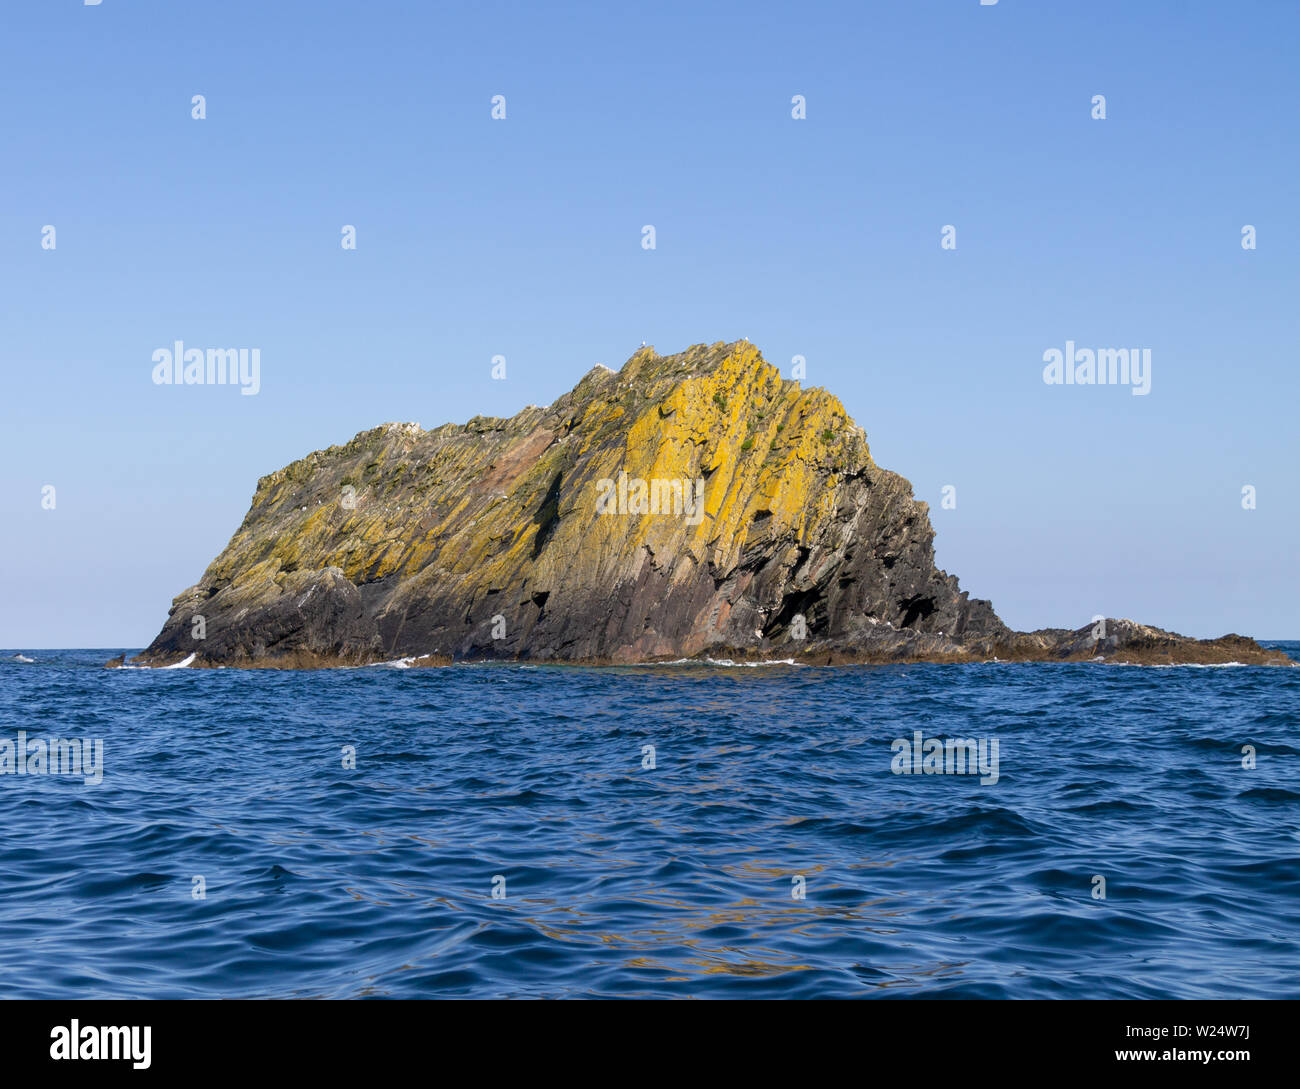 Rock formation called Black Rock rising from the Atlantic Ocean off the South West Coast of Ireland Stock Photo